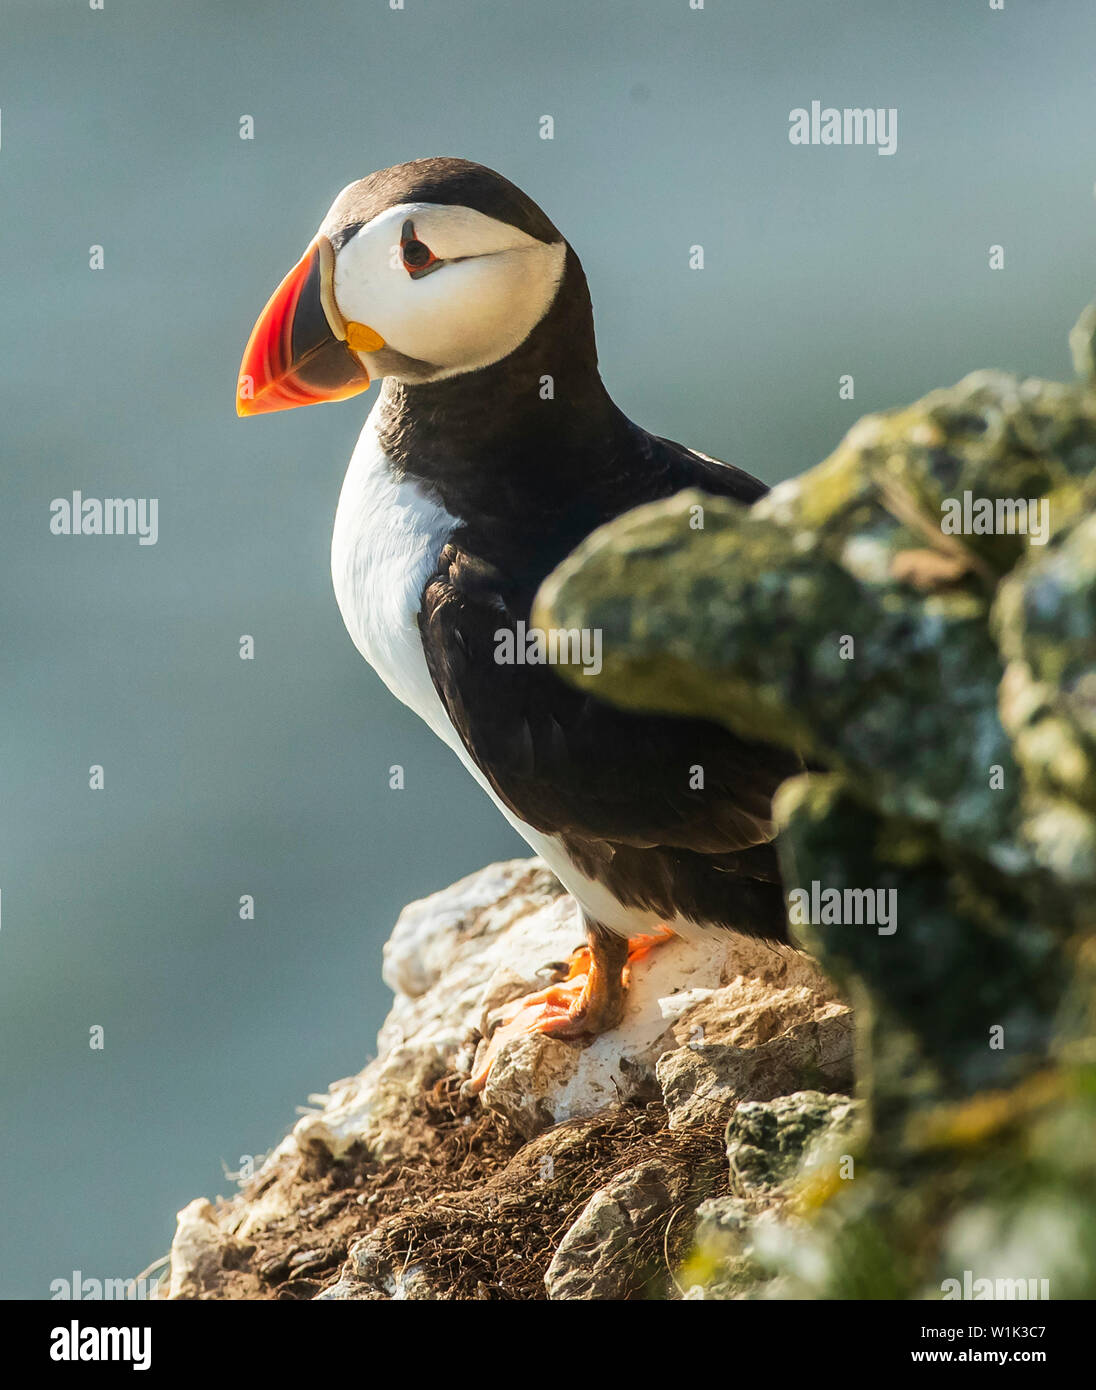 A Puffin nests at the RSPB nature reserve at Bempton Cliffs in Yorkshire, as over 250,000 seabirds flock to the chalk cliffs to find a mate and raise their young. Picture date: Wednesday July 3, 2018. From April to August the cliffs are alive with nest-building adults or young chicks. Thousands of gannets nest on the cliffs of the only mainland gannetry in England. Bempton is also home to the largest kittiwake colony in mainland Britain. Photo credit should read: Danny Lawson/PA Wire Stock Photo